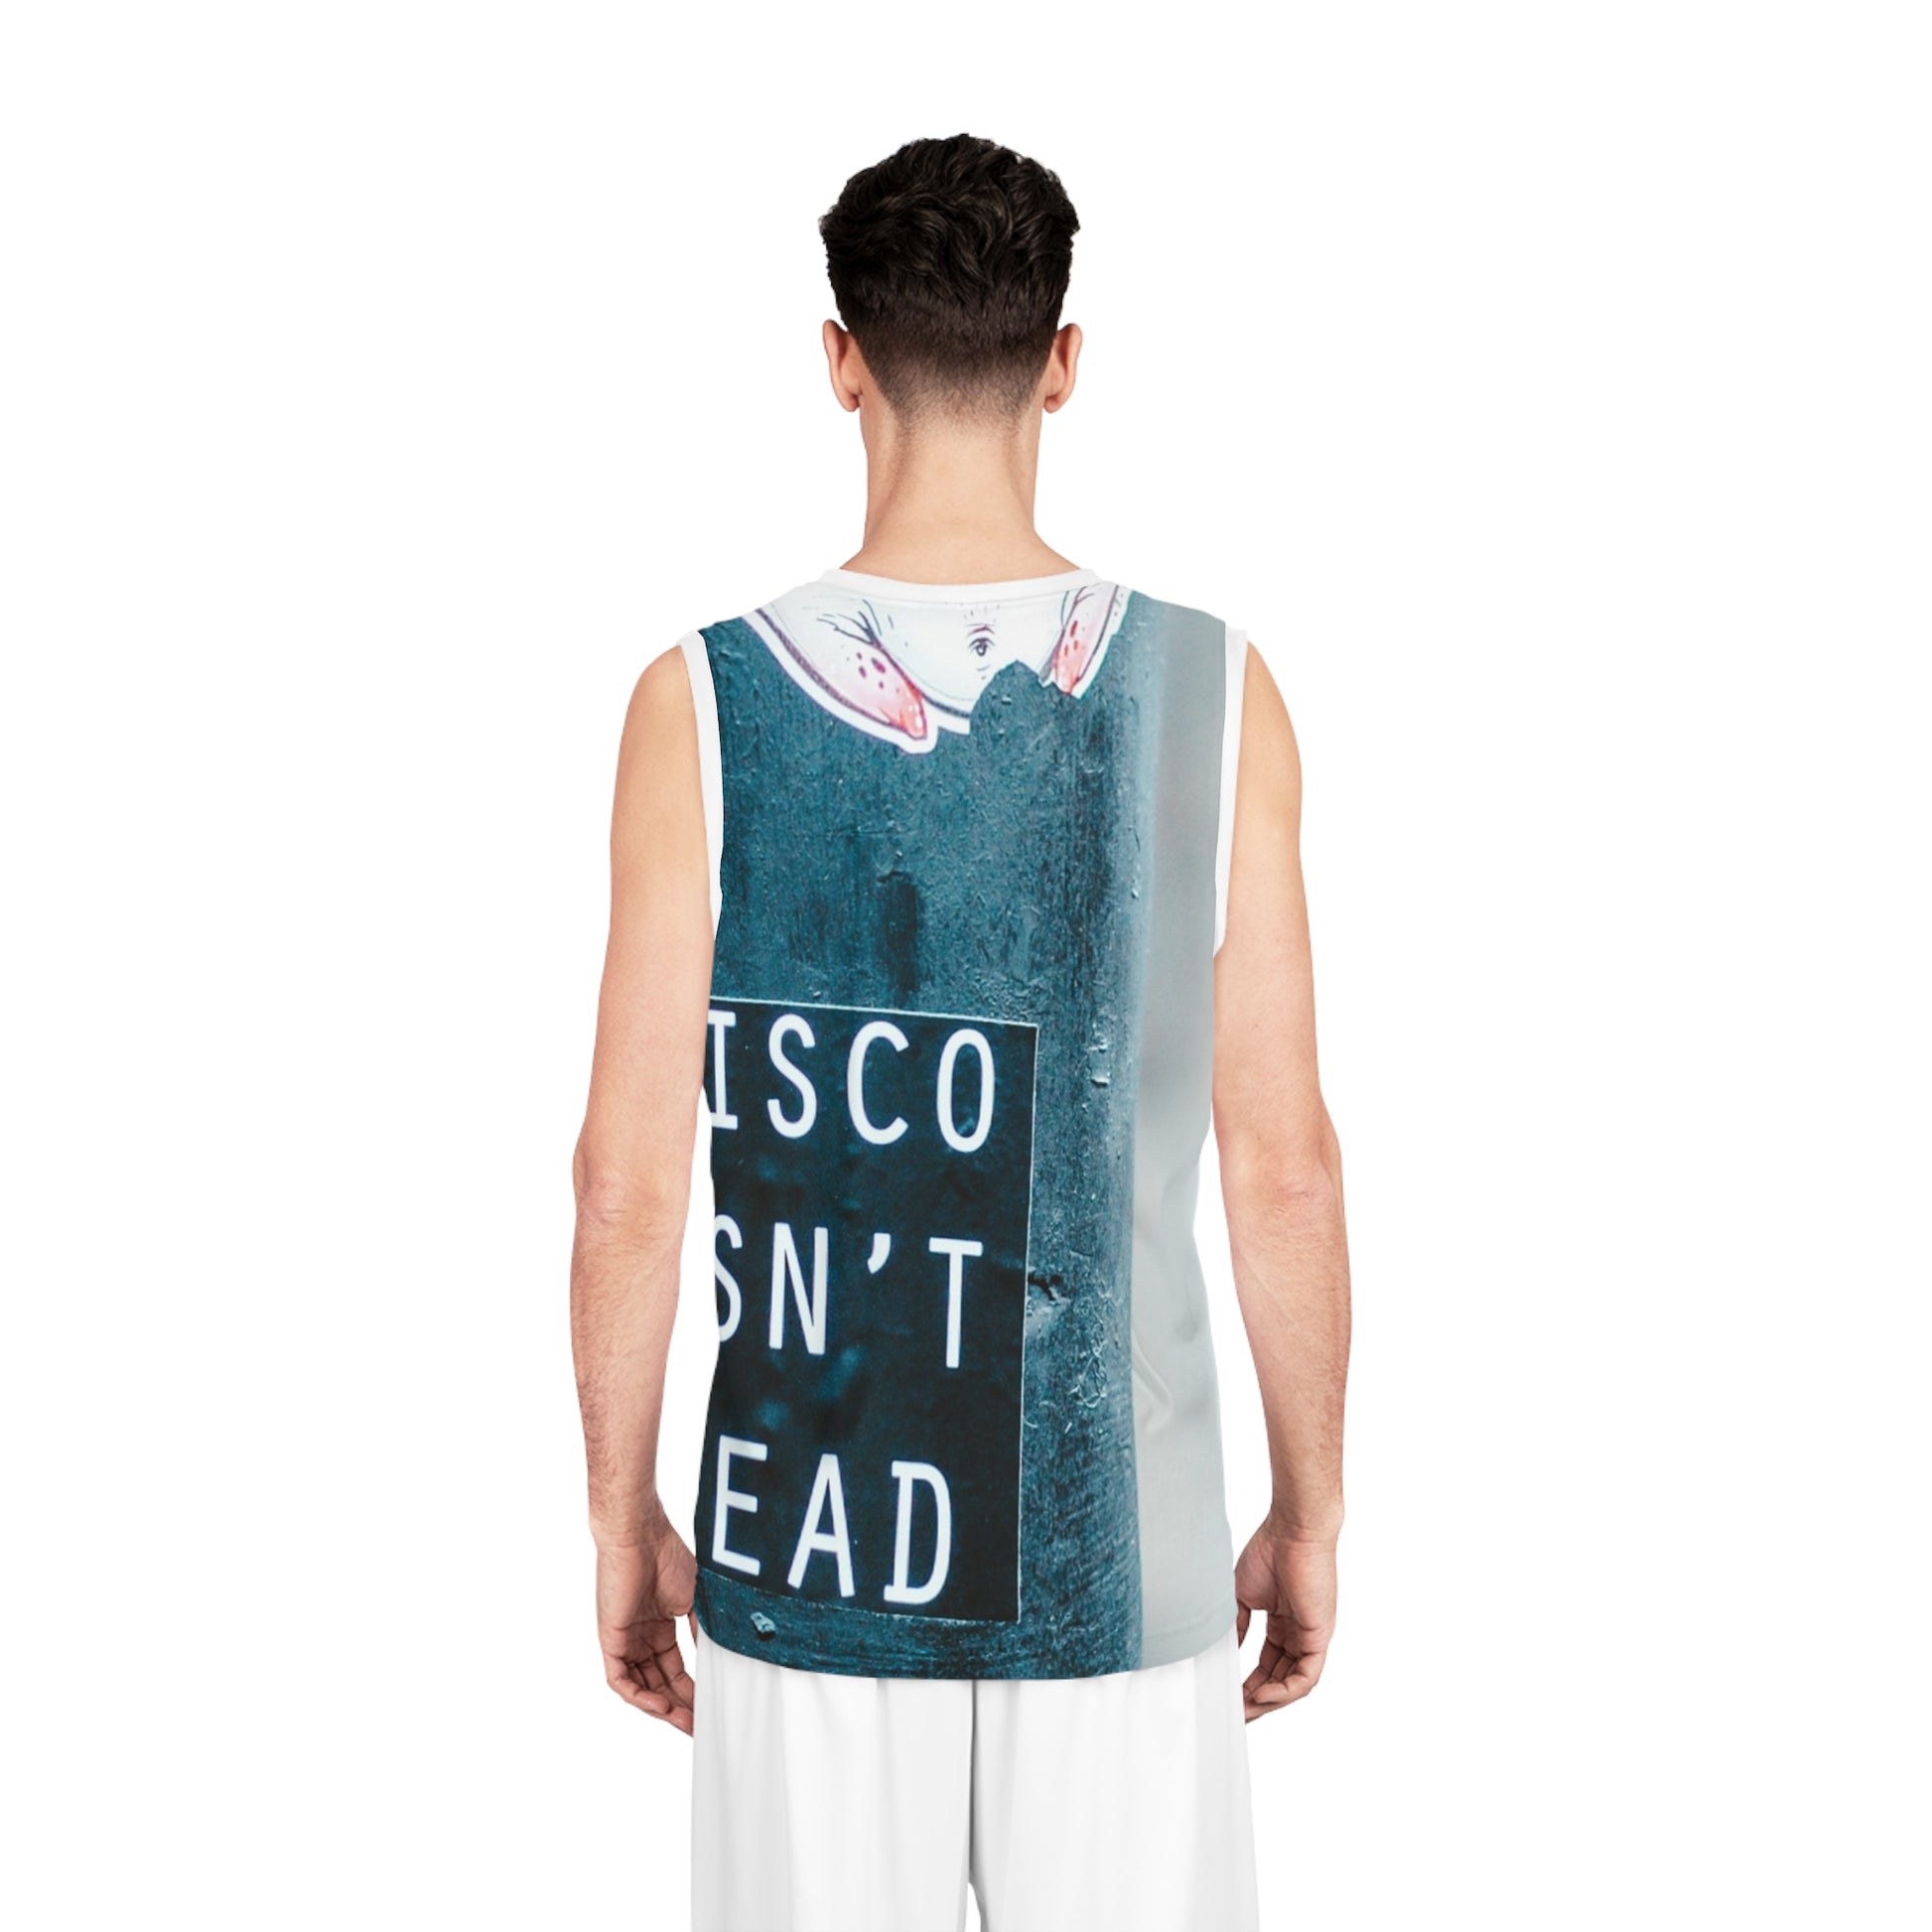 UNISEX Jersey | Disco is alive! - Ribooa